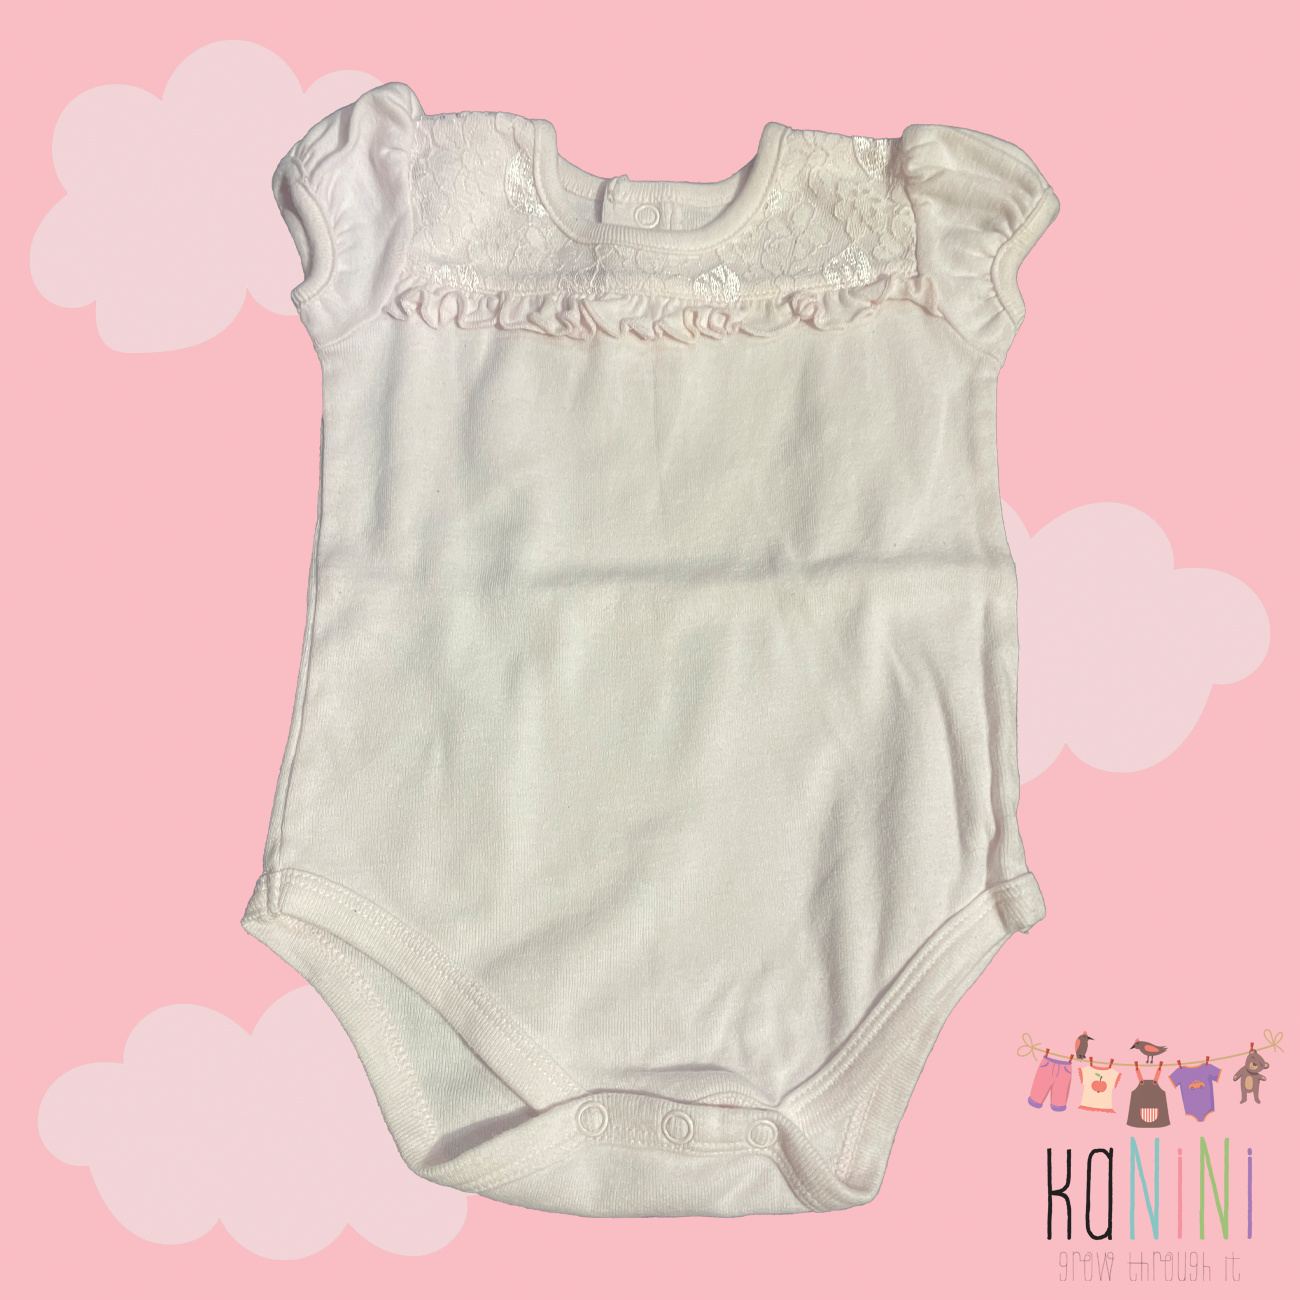 Featured image for “Woolworths 3 - 6 Months Girls Short Sleeve Romper”